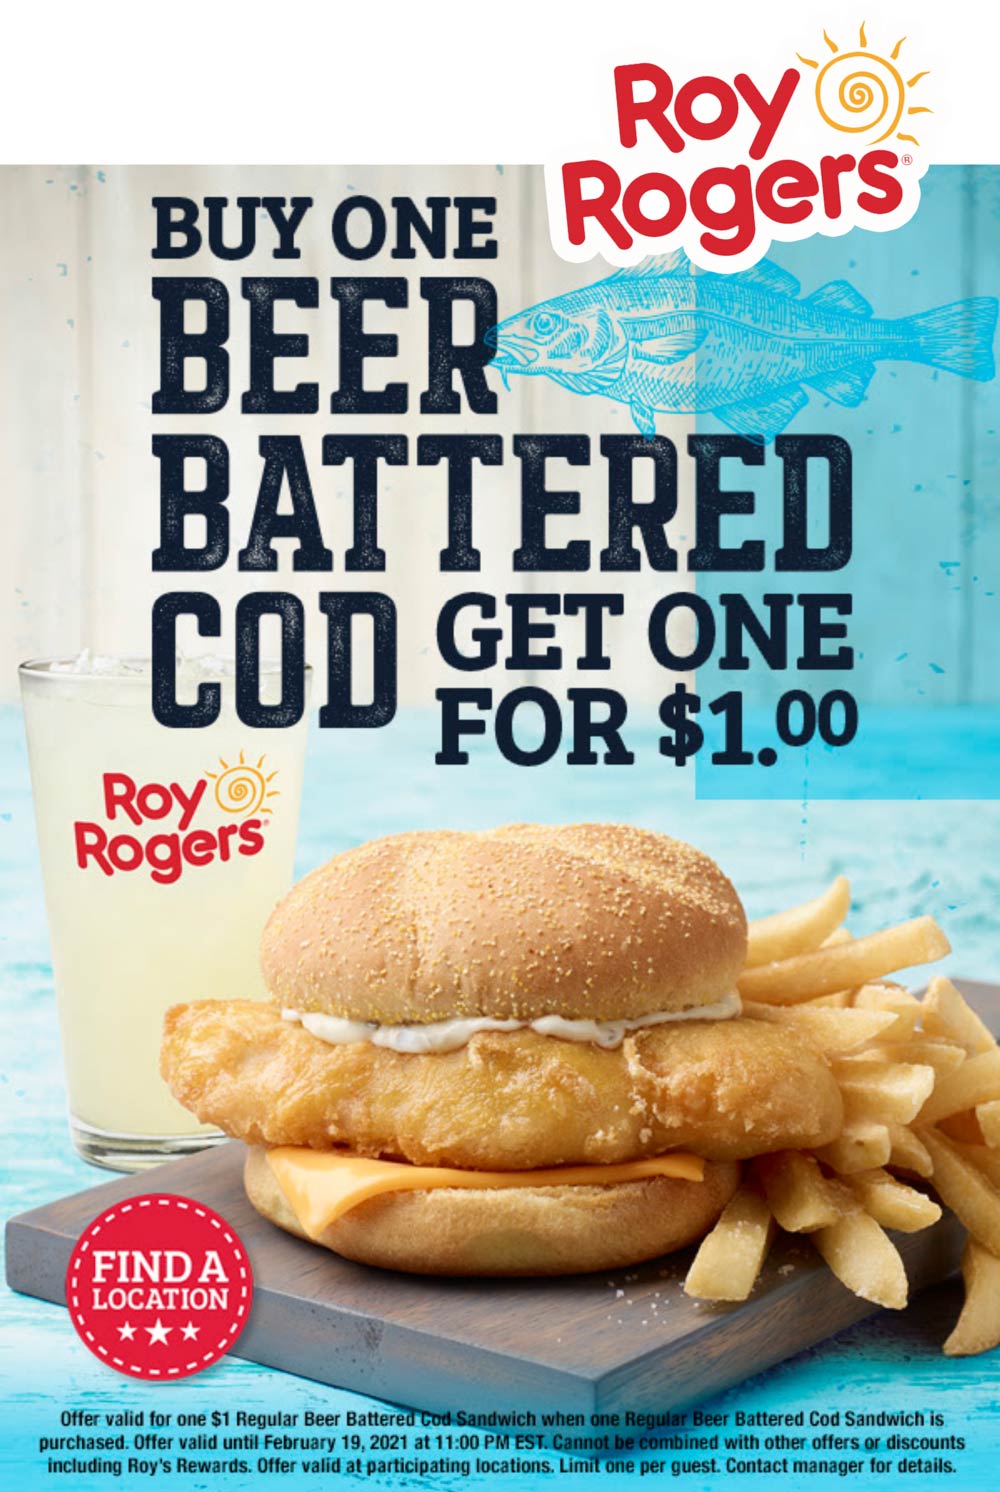 Roy Rogers restaurants Coupon  Second beer battered cod sandwich $1 today at Roy Rogers #royrogers 